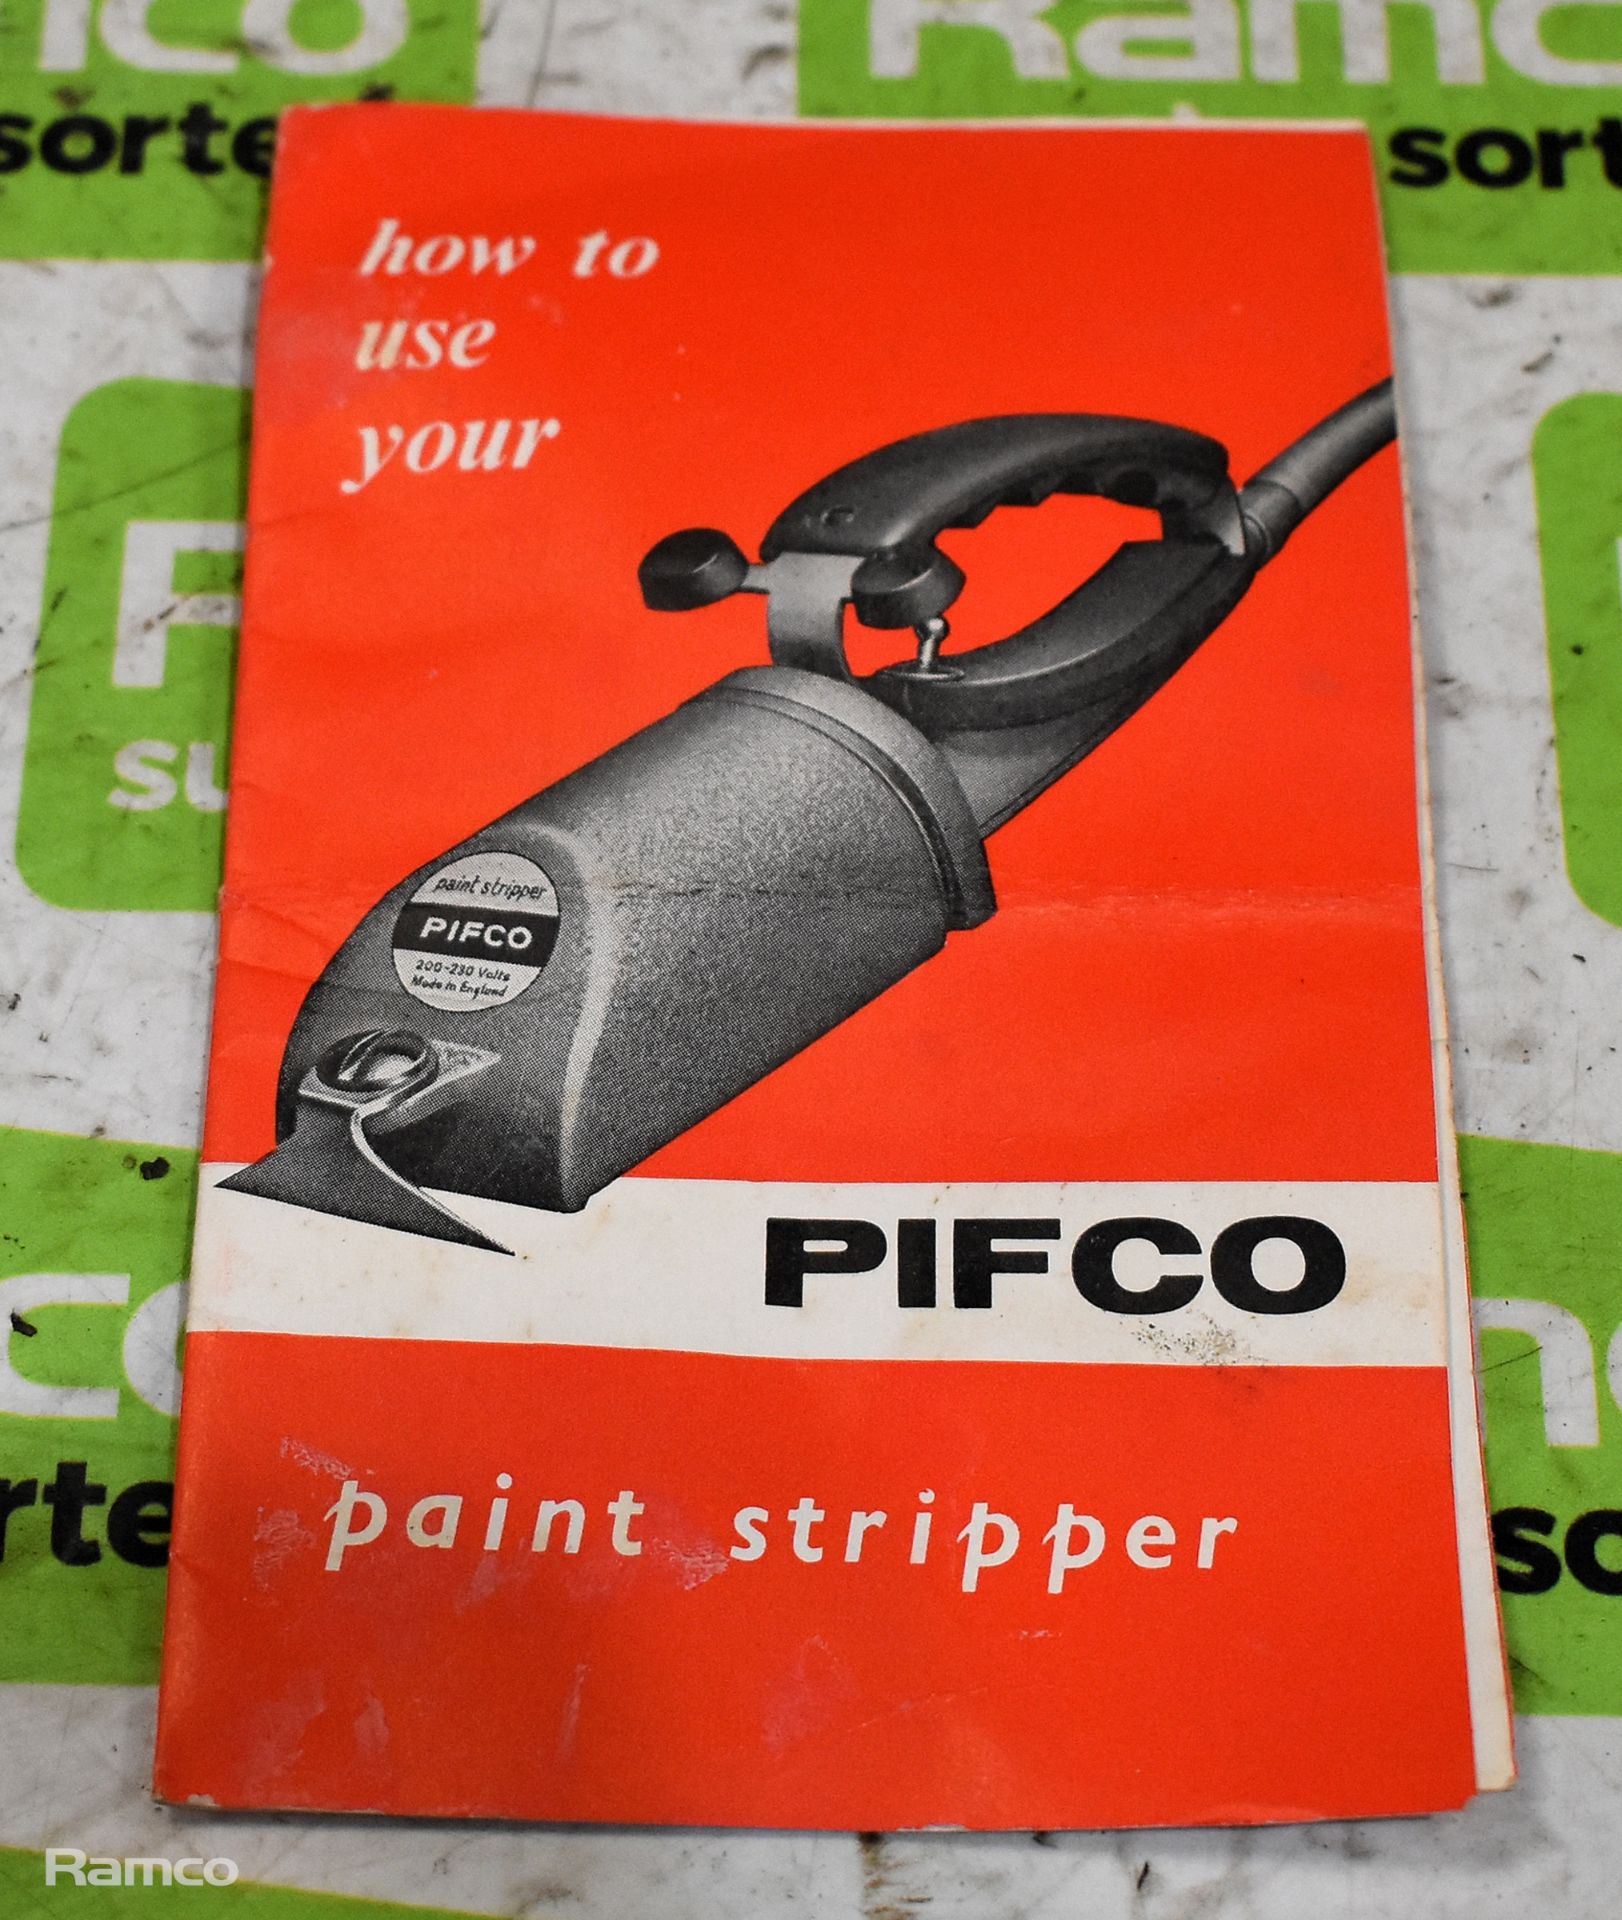 Pifco electric paint stripper - Image 7 of 8